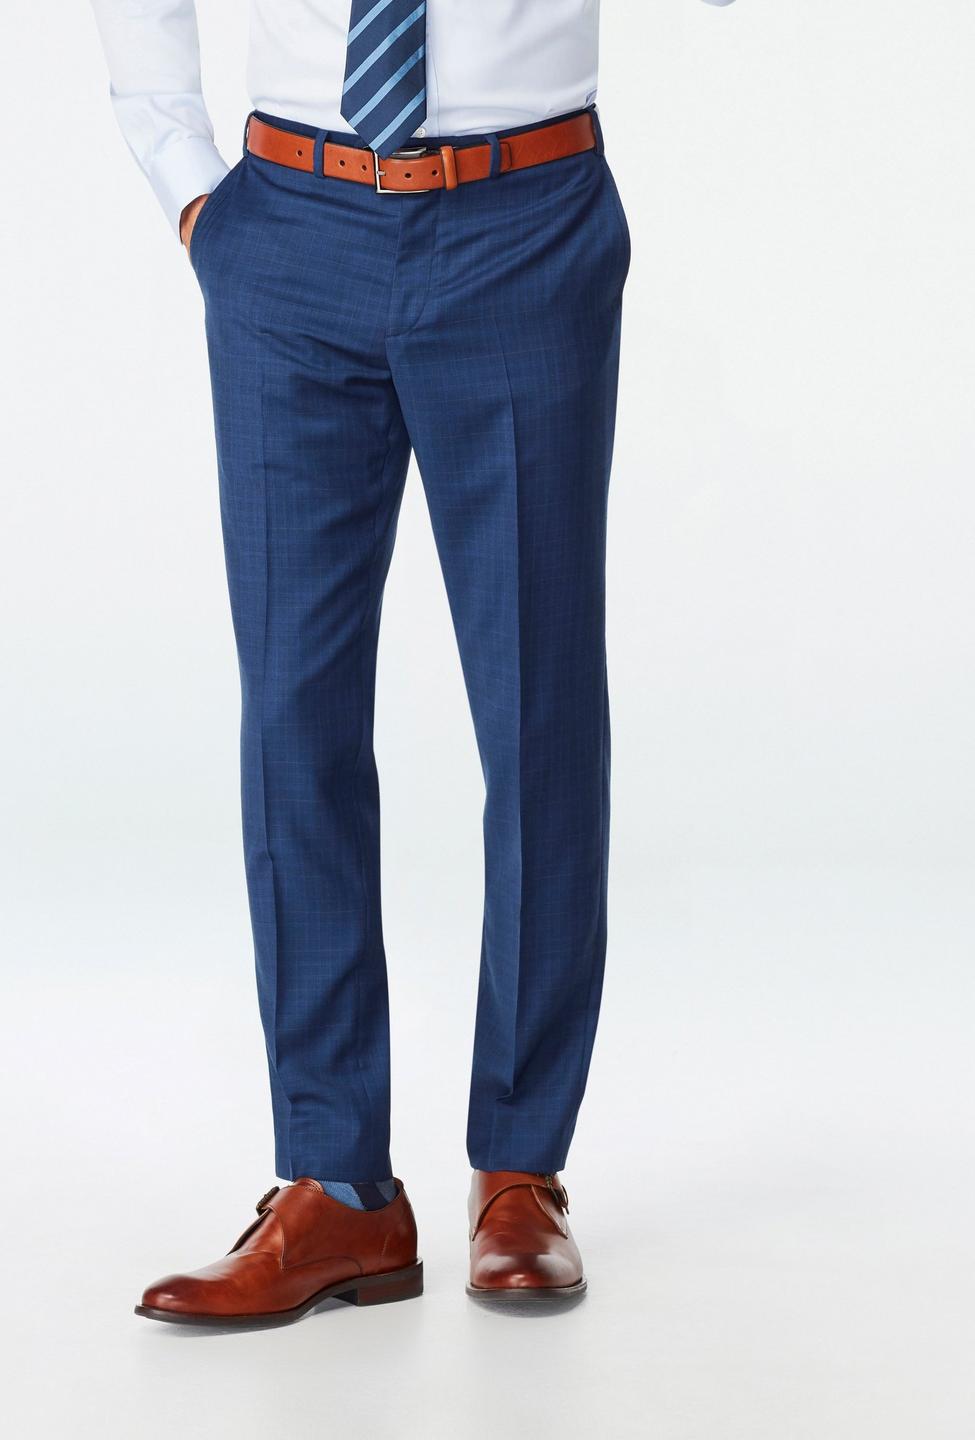 Buy WES Formals Navy Relaxed-Fit Shirt from Westside